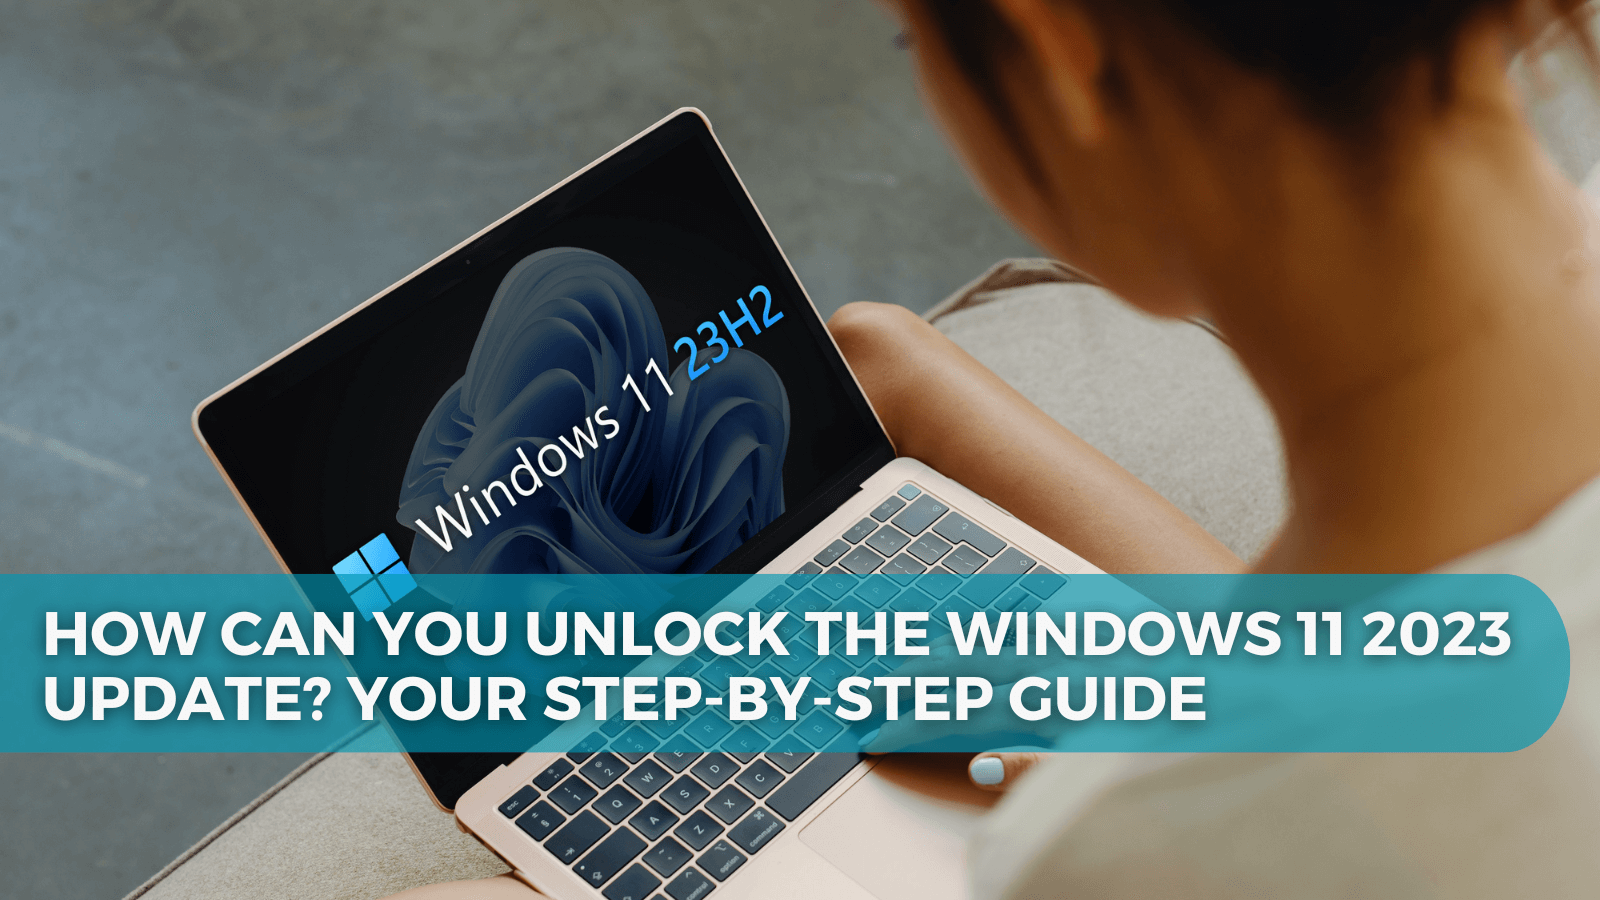 How Can You Unlock the Windows 11 2023 Update? Your Step-by-Step Guide